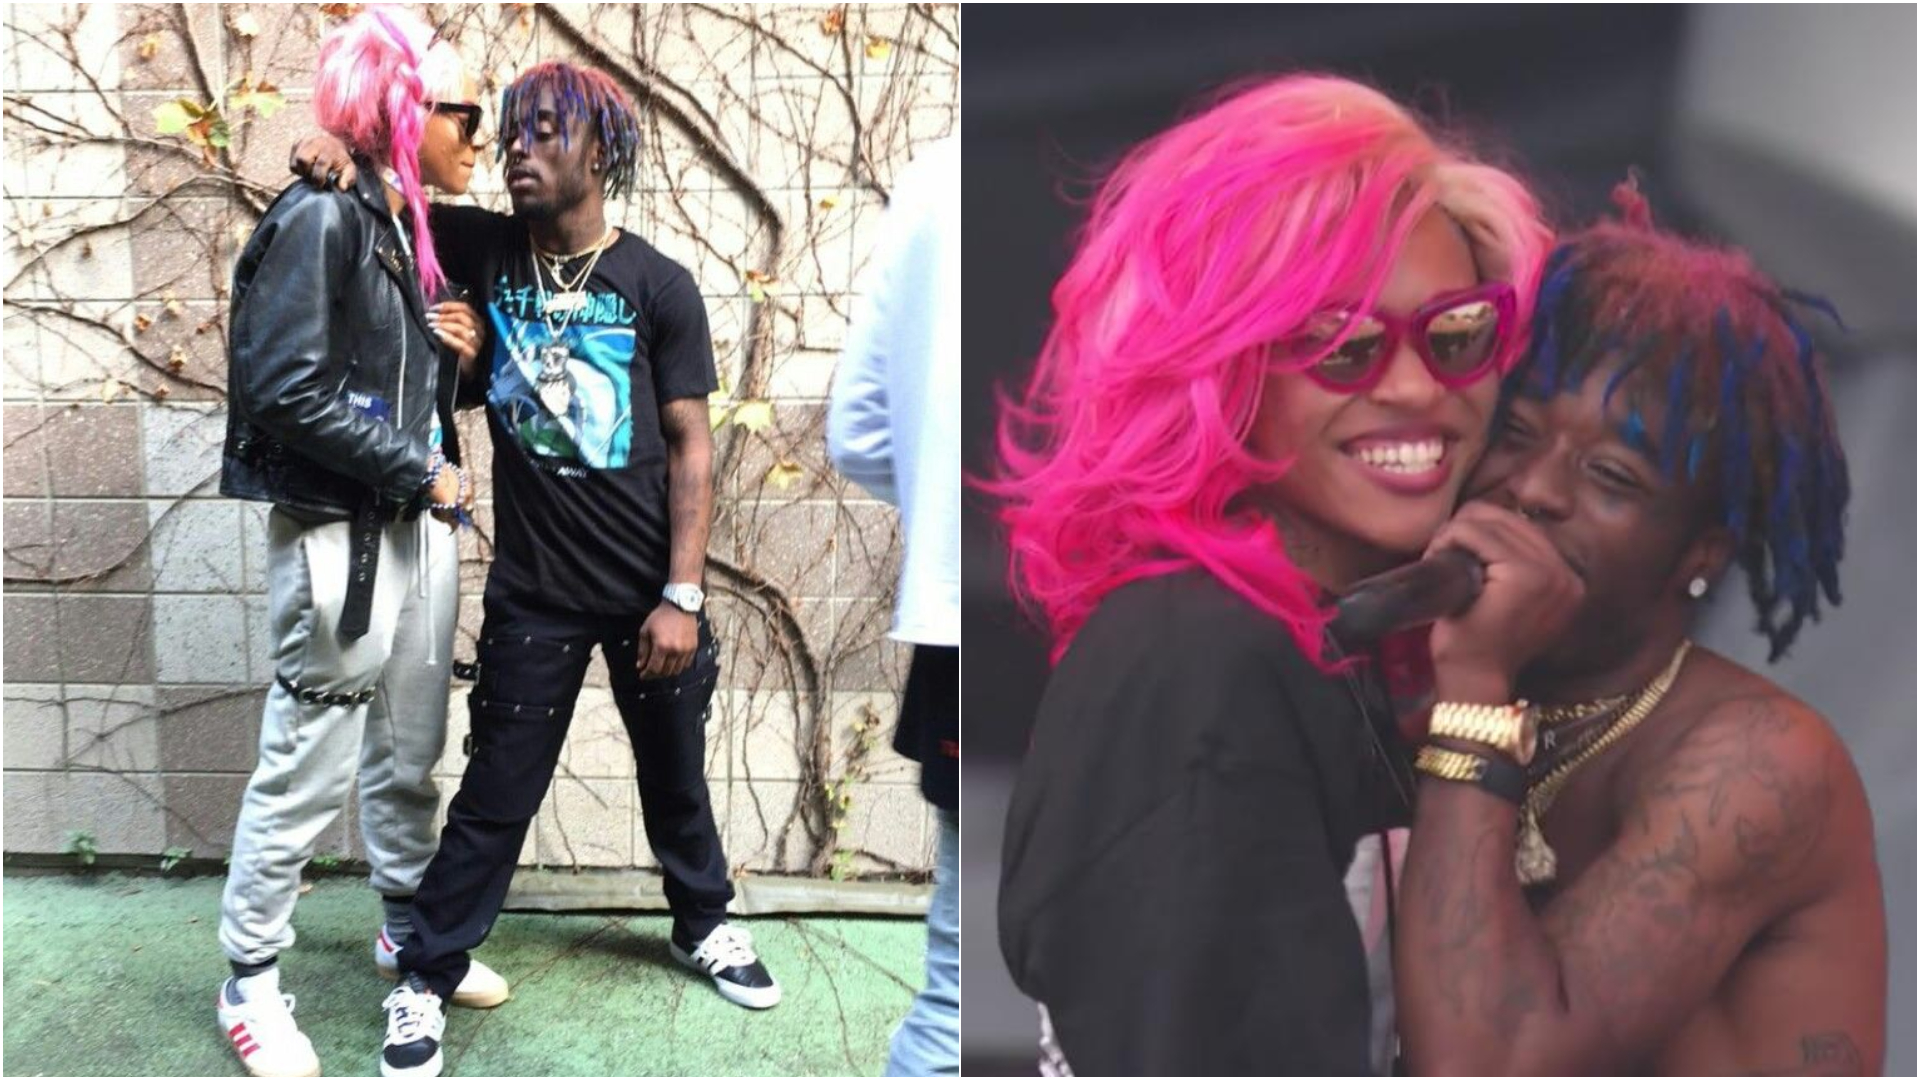 Lil Uzi Rapper Girlfriend Who Is He Dating Now In 2021? The Artistree